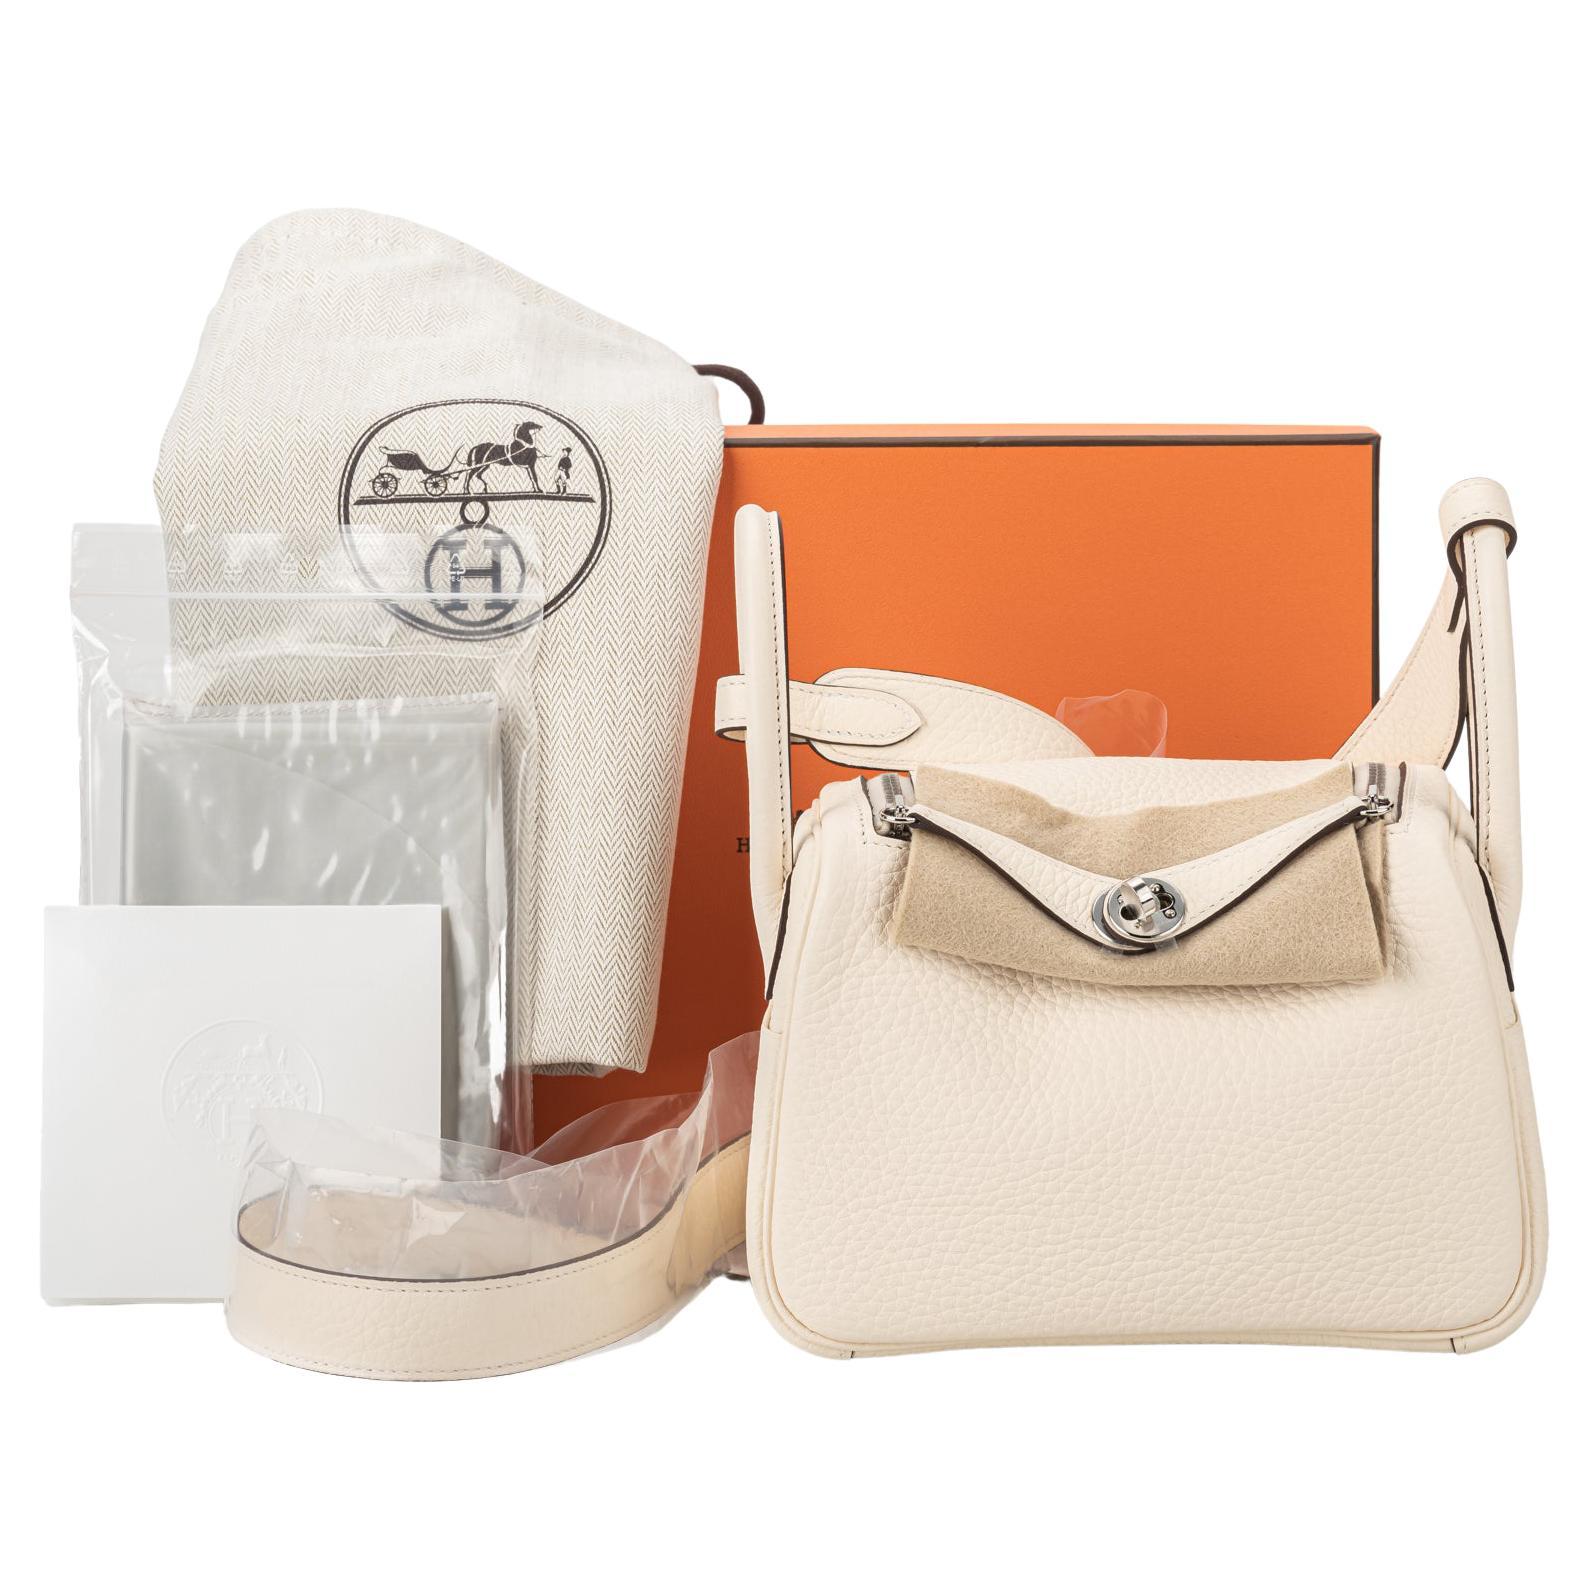 Hermes brand new in box mini lindy nata togo with palladium hardware. Date stamp Z, 2021. Coveted new size , can be worn in three ways, also cross body. Two interior pockets. Comes with dust cover, booklet, rain jacket and original box.